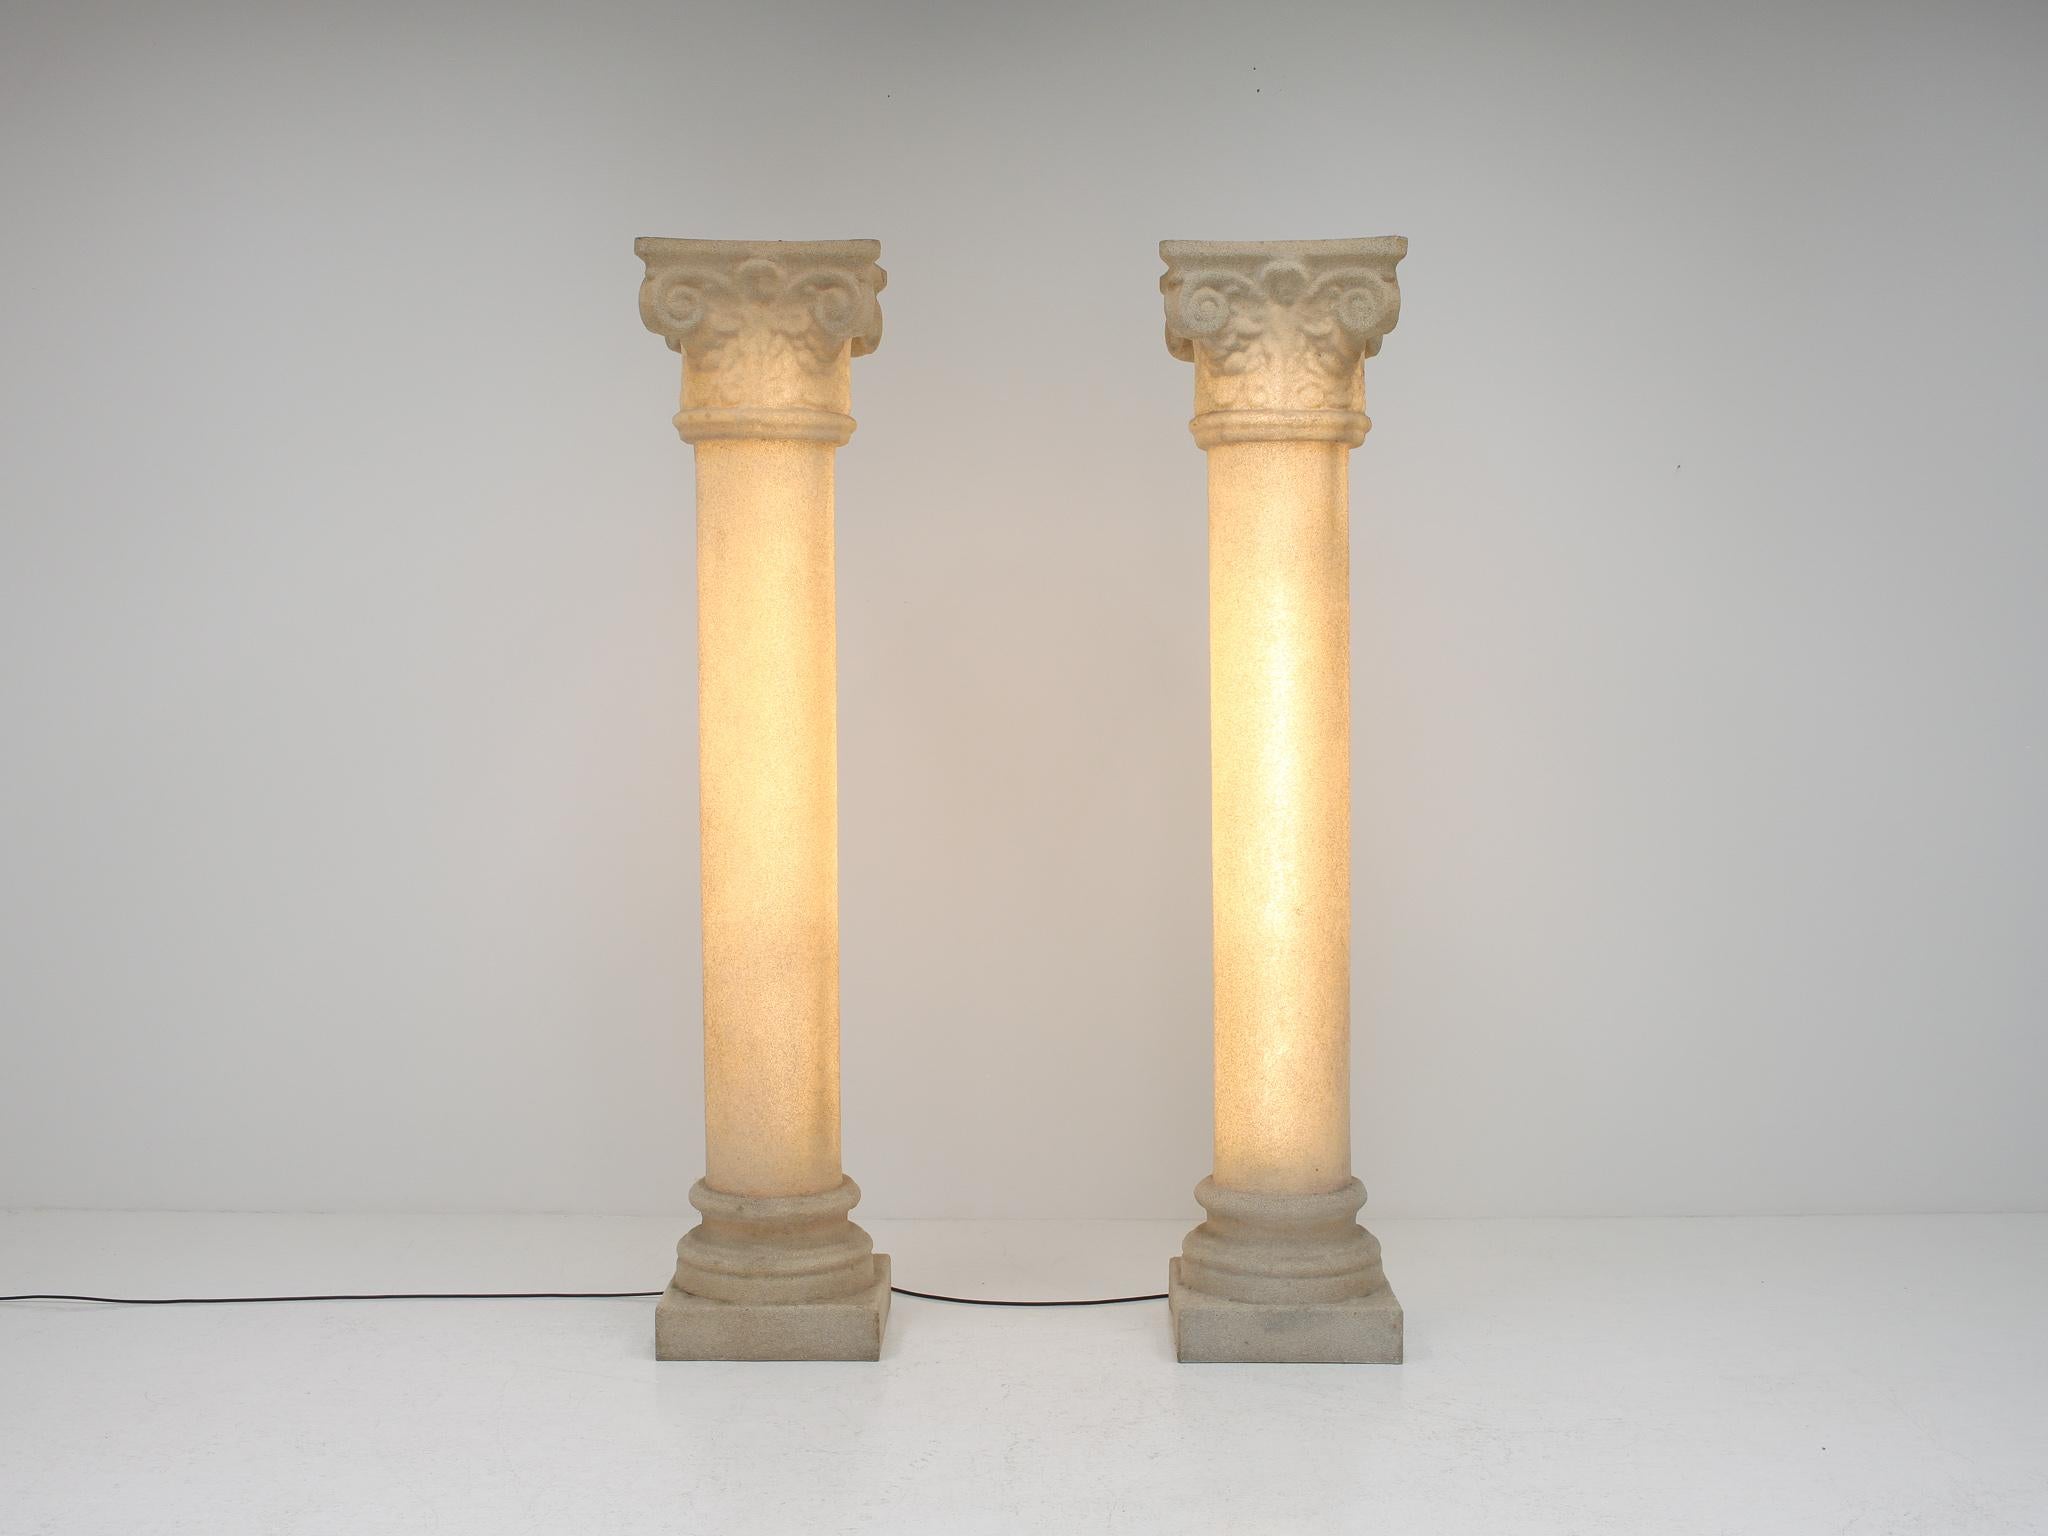 Pair of 6.5ft Giant Column Lamps by Andre Cazenave for Singleton Italy, 1970's For Sale 5